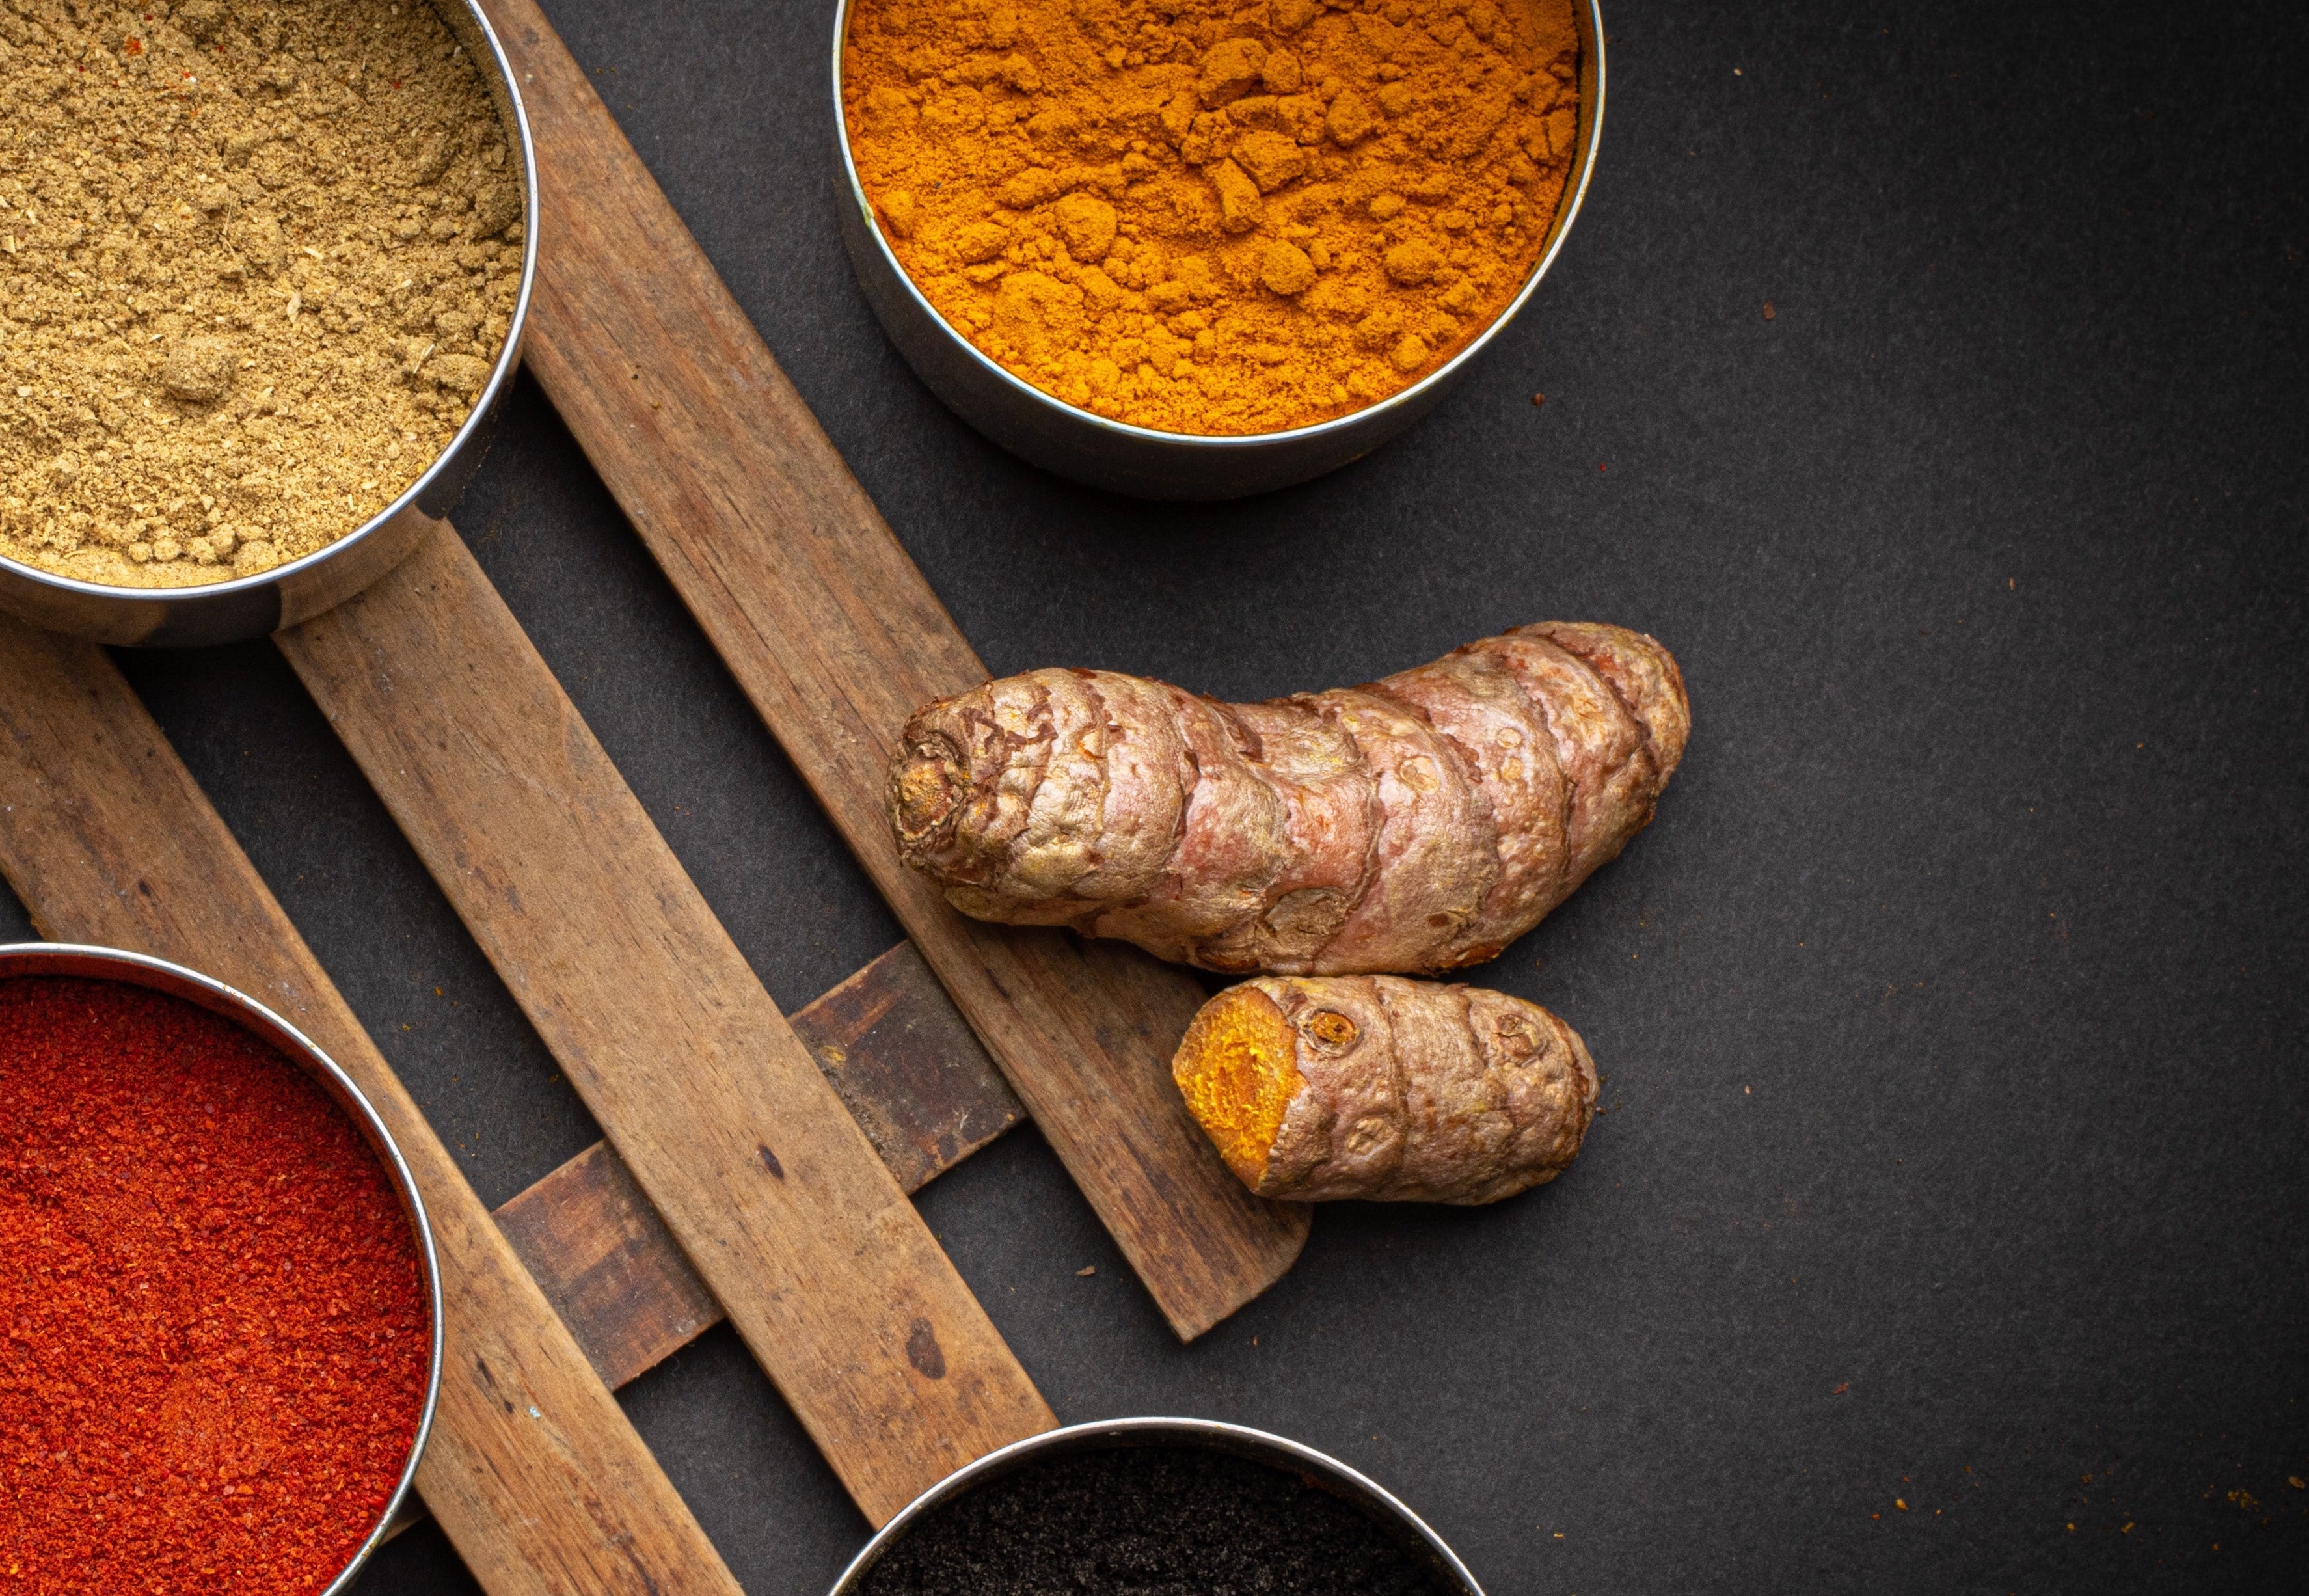 Herb of the Month: Turmeric